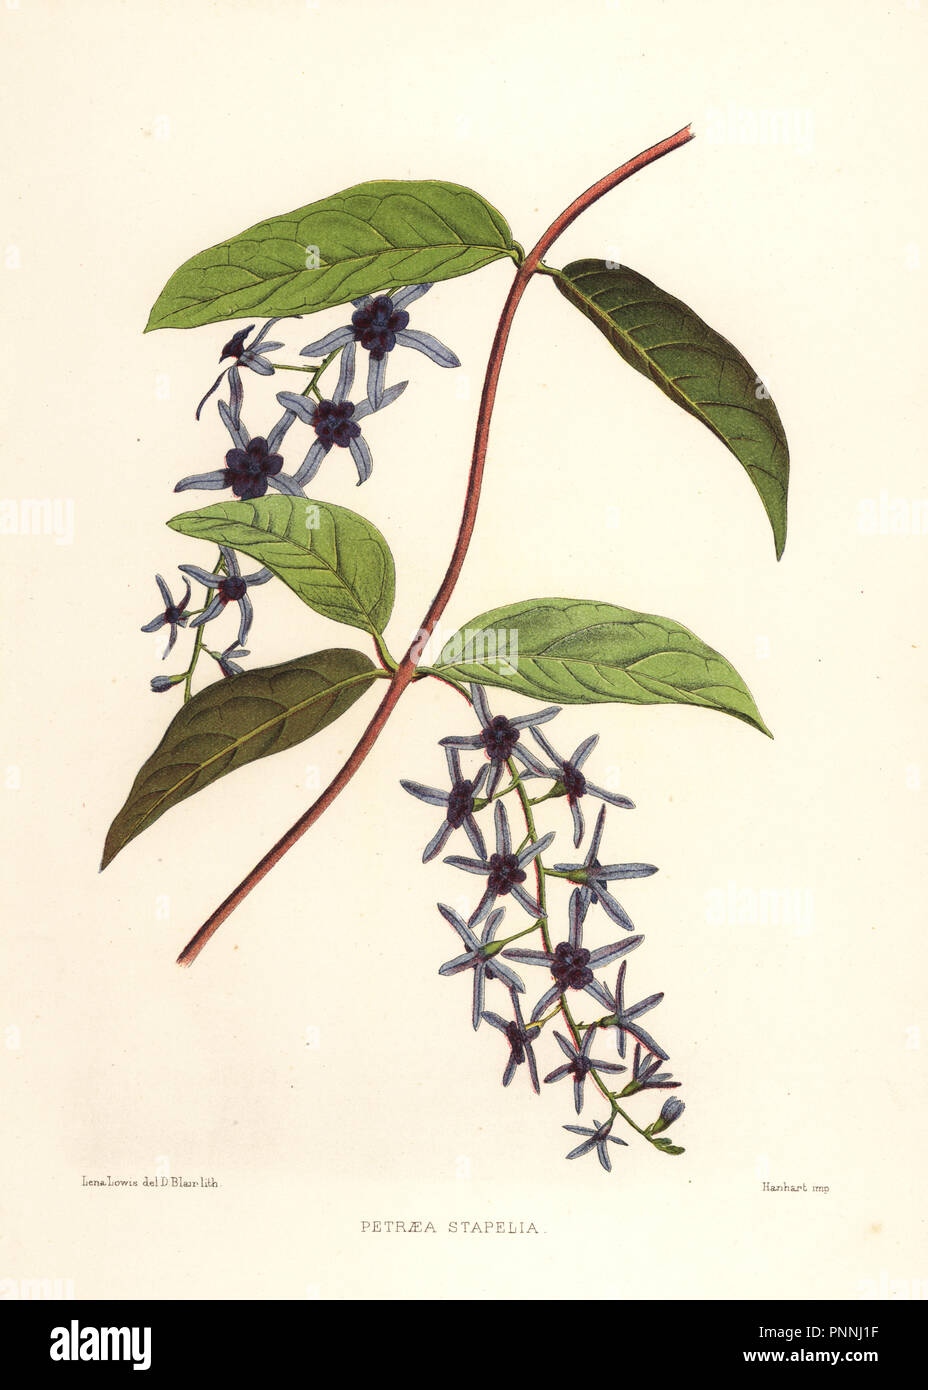 Sandpaper vine, Petrea volubilis (Petraea stapelia). Handcoloured lithograph by D. Blair after an illustration by Lena Lowis from her Familiar Indian Flowers with Coloured Plates, L. Reeve, London, 1878. Lena Lowis, formerly Selena Caroline Shakespear (1845-1919), was a British woman artist who traveled to India with her husband Lt.-Col. Ninian Lowis. Stock Photo